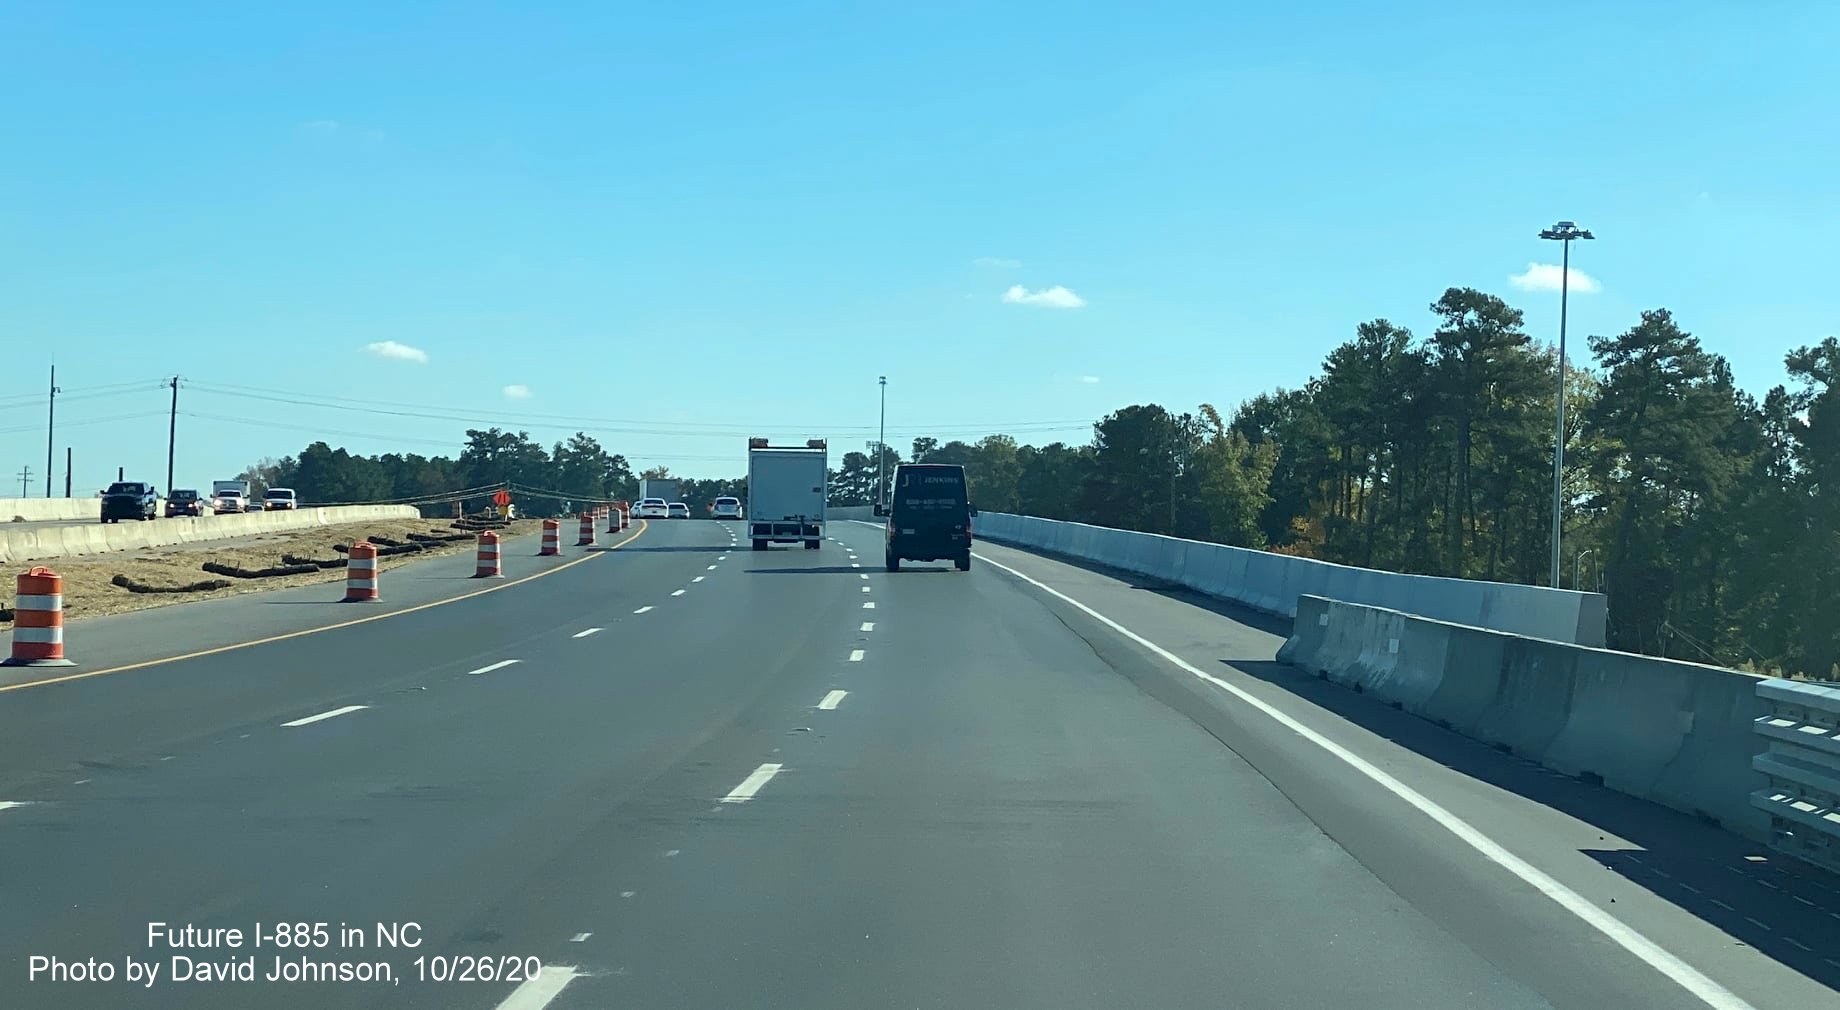 Image of traffic on newly opened US 70 East (Future I-885 South) lanes approaching bridge over Business 70/NC 98 in Durham, by David Johnson October 2020